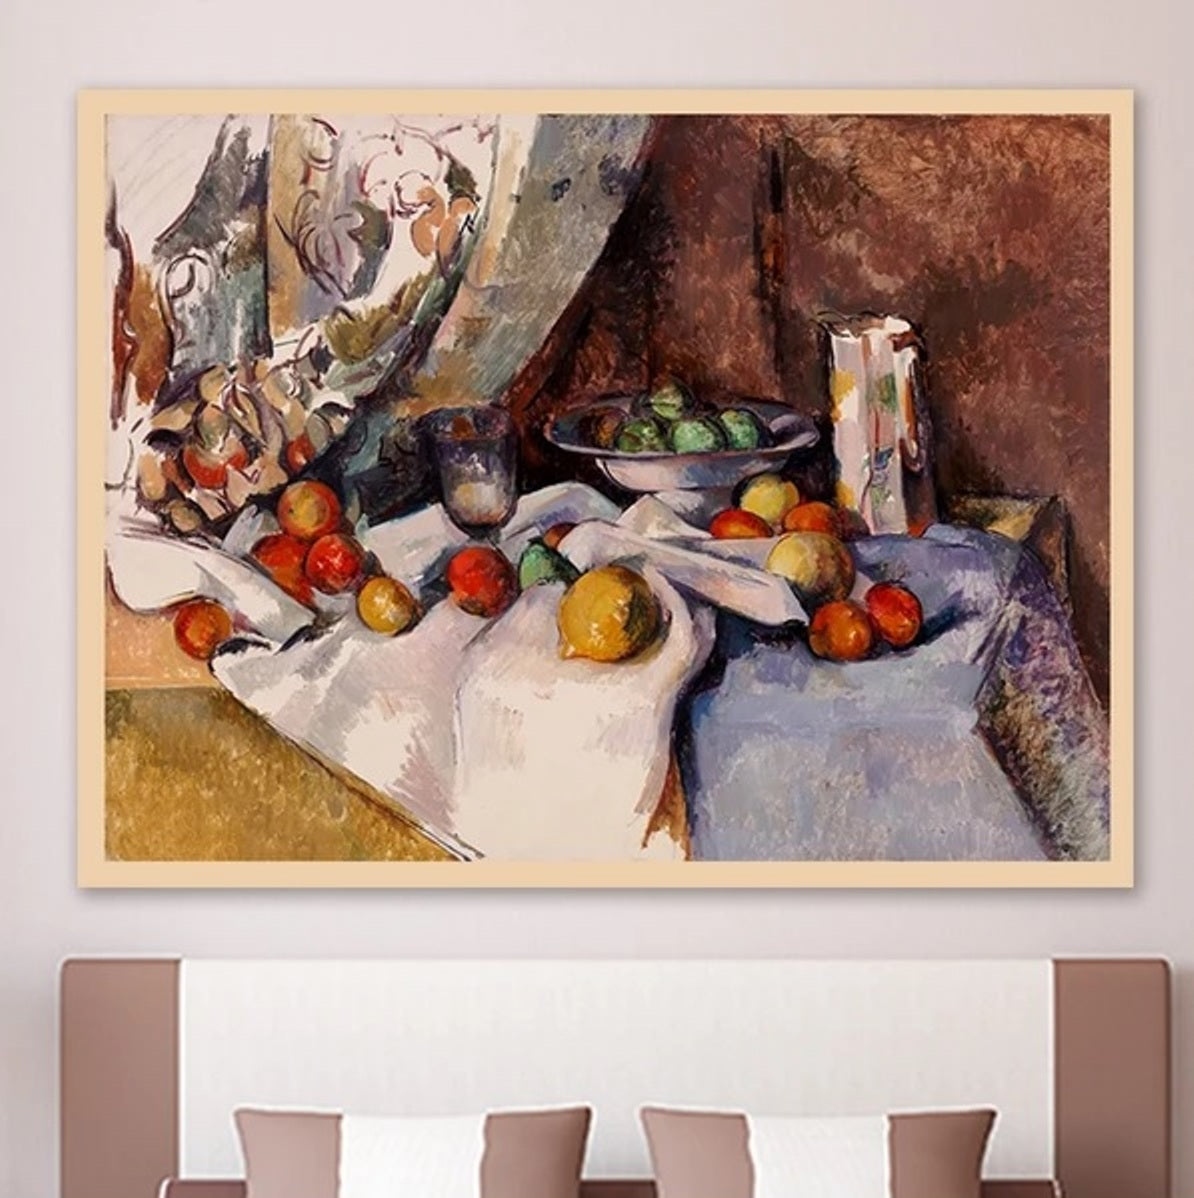 Still Life with Apples by Paul Cezanne - Van-Go Paint-By-Number Kit